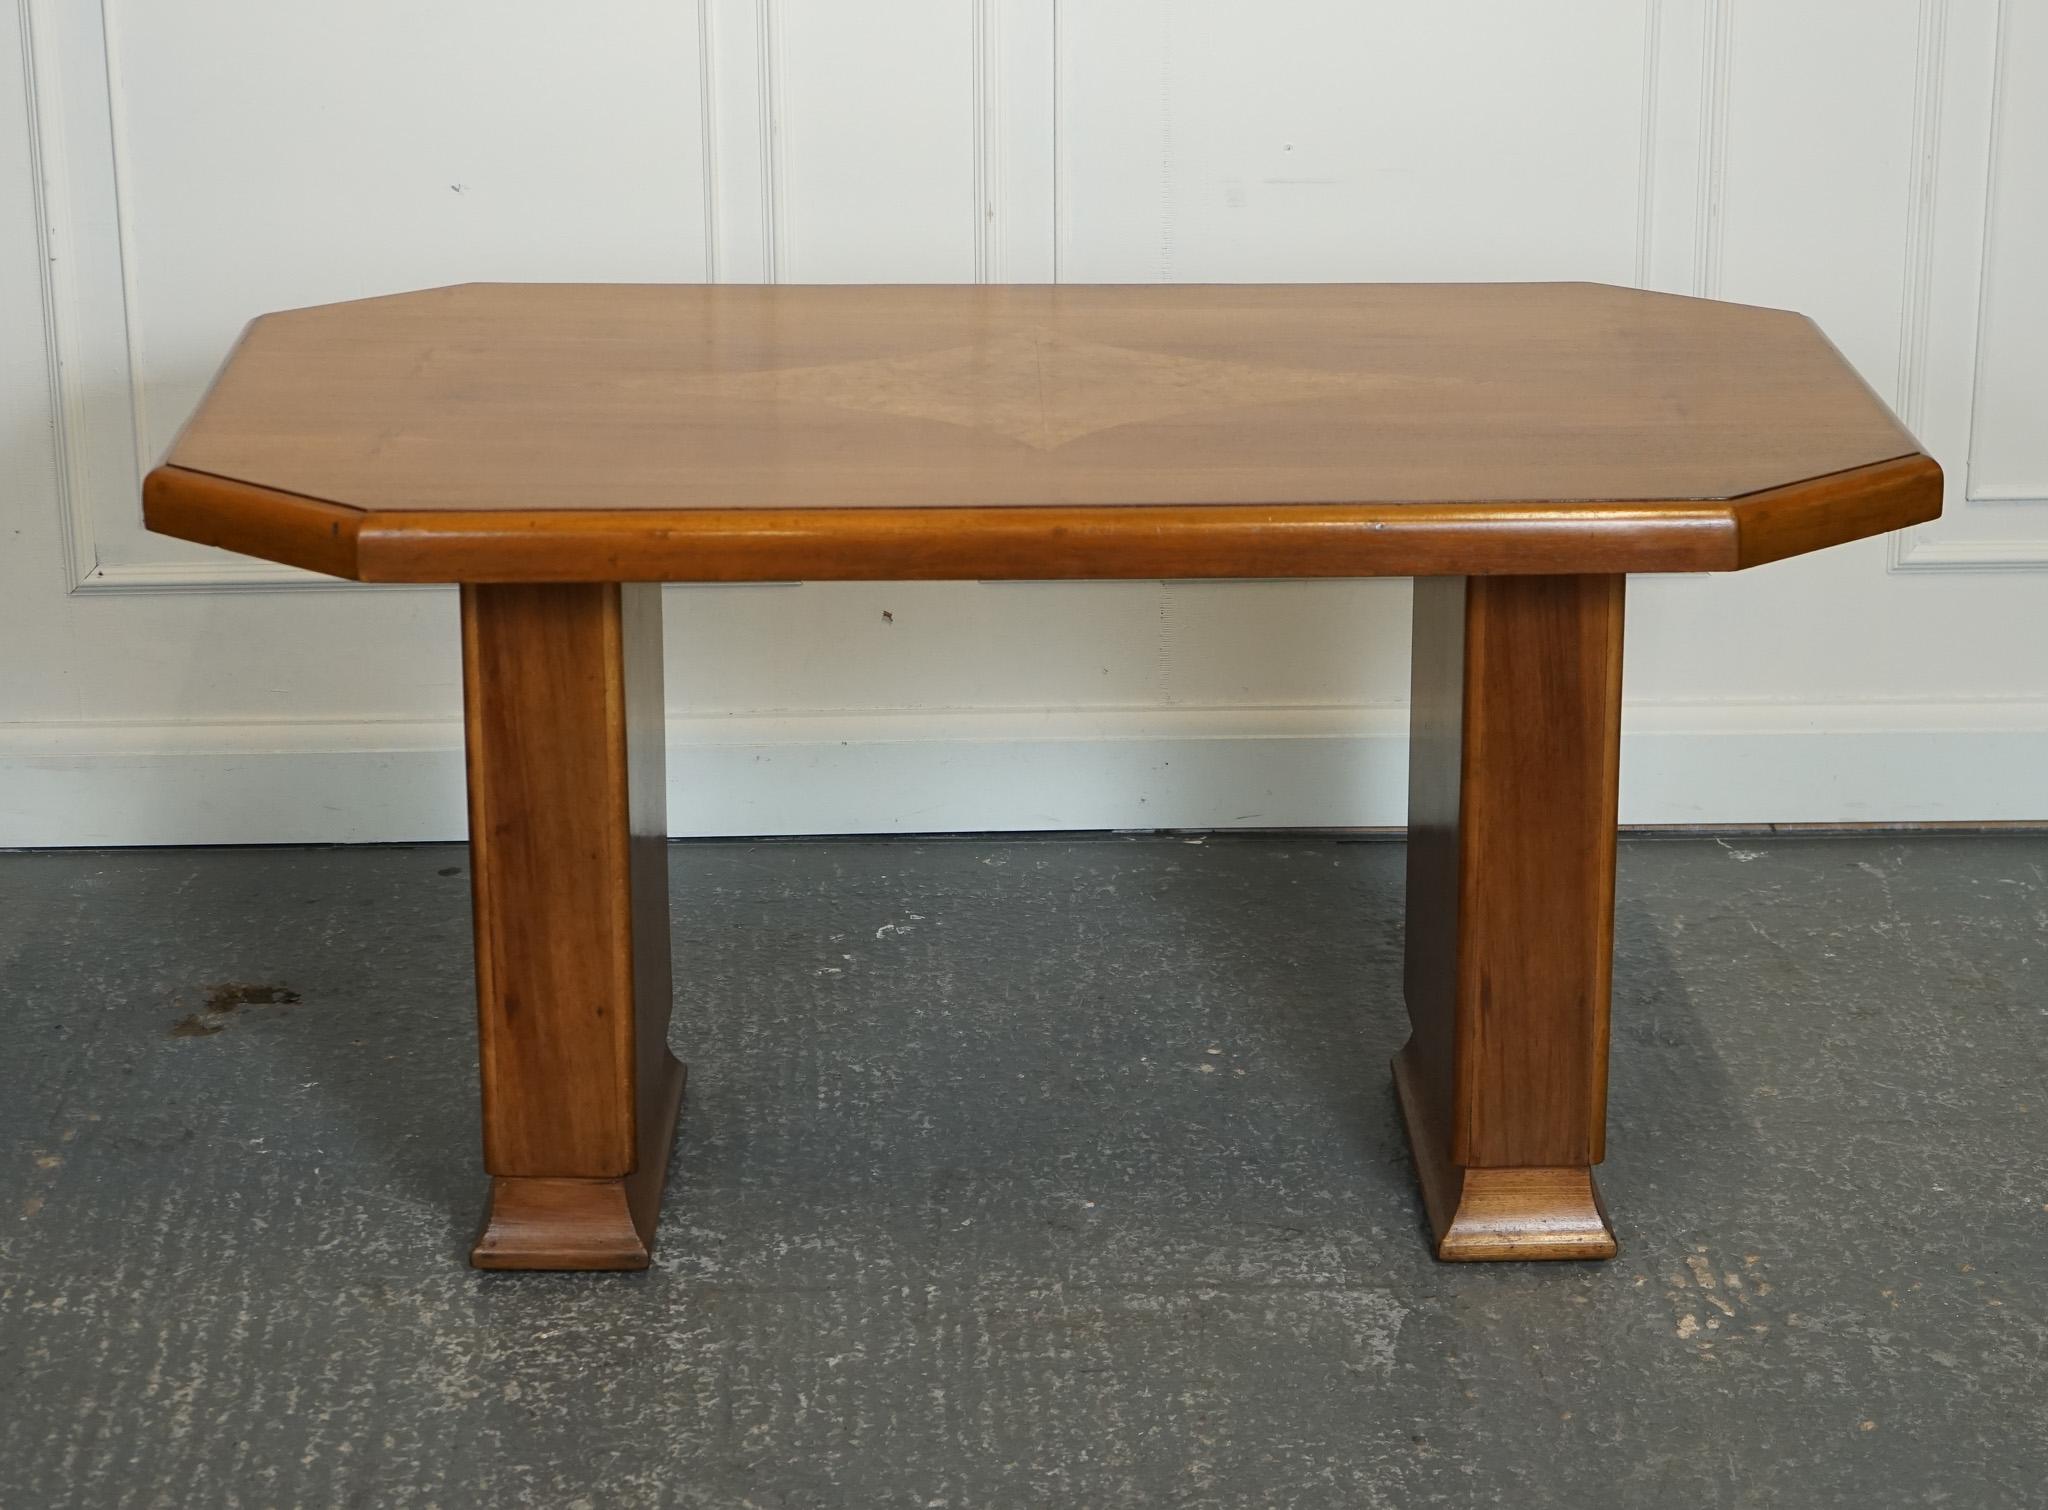 
We are delighted to offer for sale this Lovely Vintage Art Deco Walnut Dining Table.

The vintage Art Deco Style walnut veneer on hardwood dining table is a stunning piece of furniture that can comfortably seat 4 to 6 people. Made from high-quality